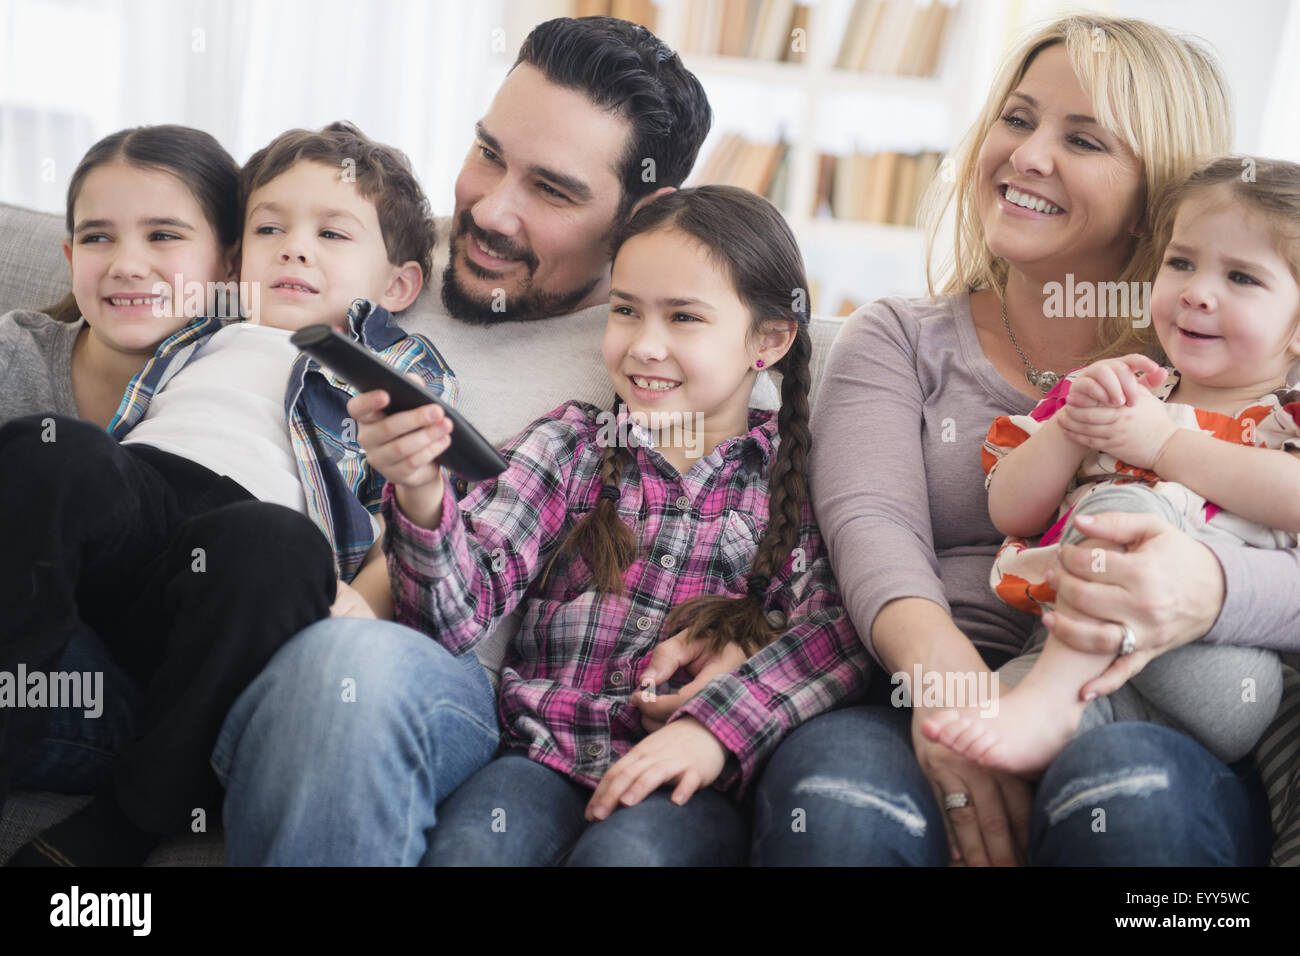 Caucasian parents and children smiling in living room Stock Photo